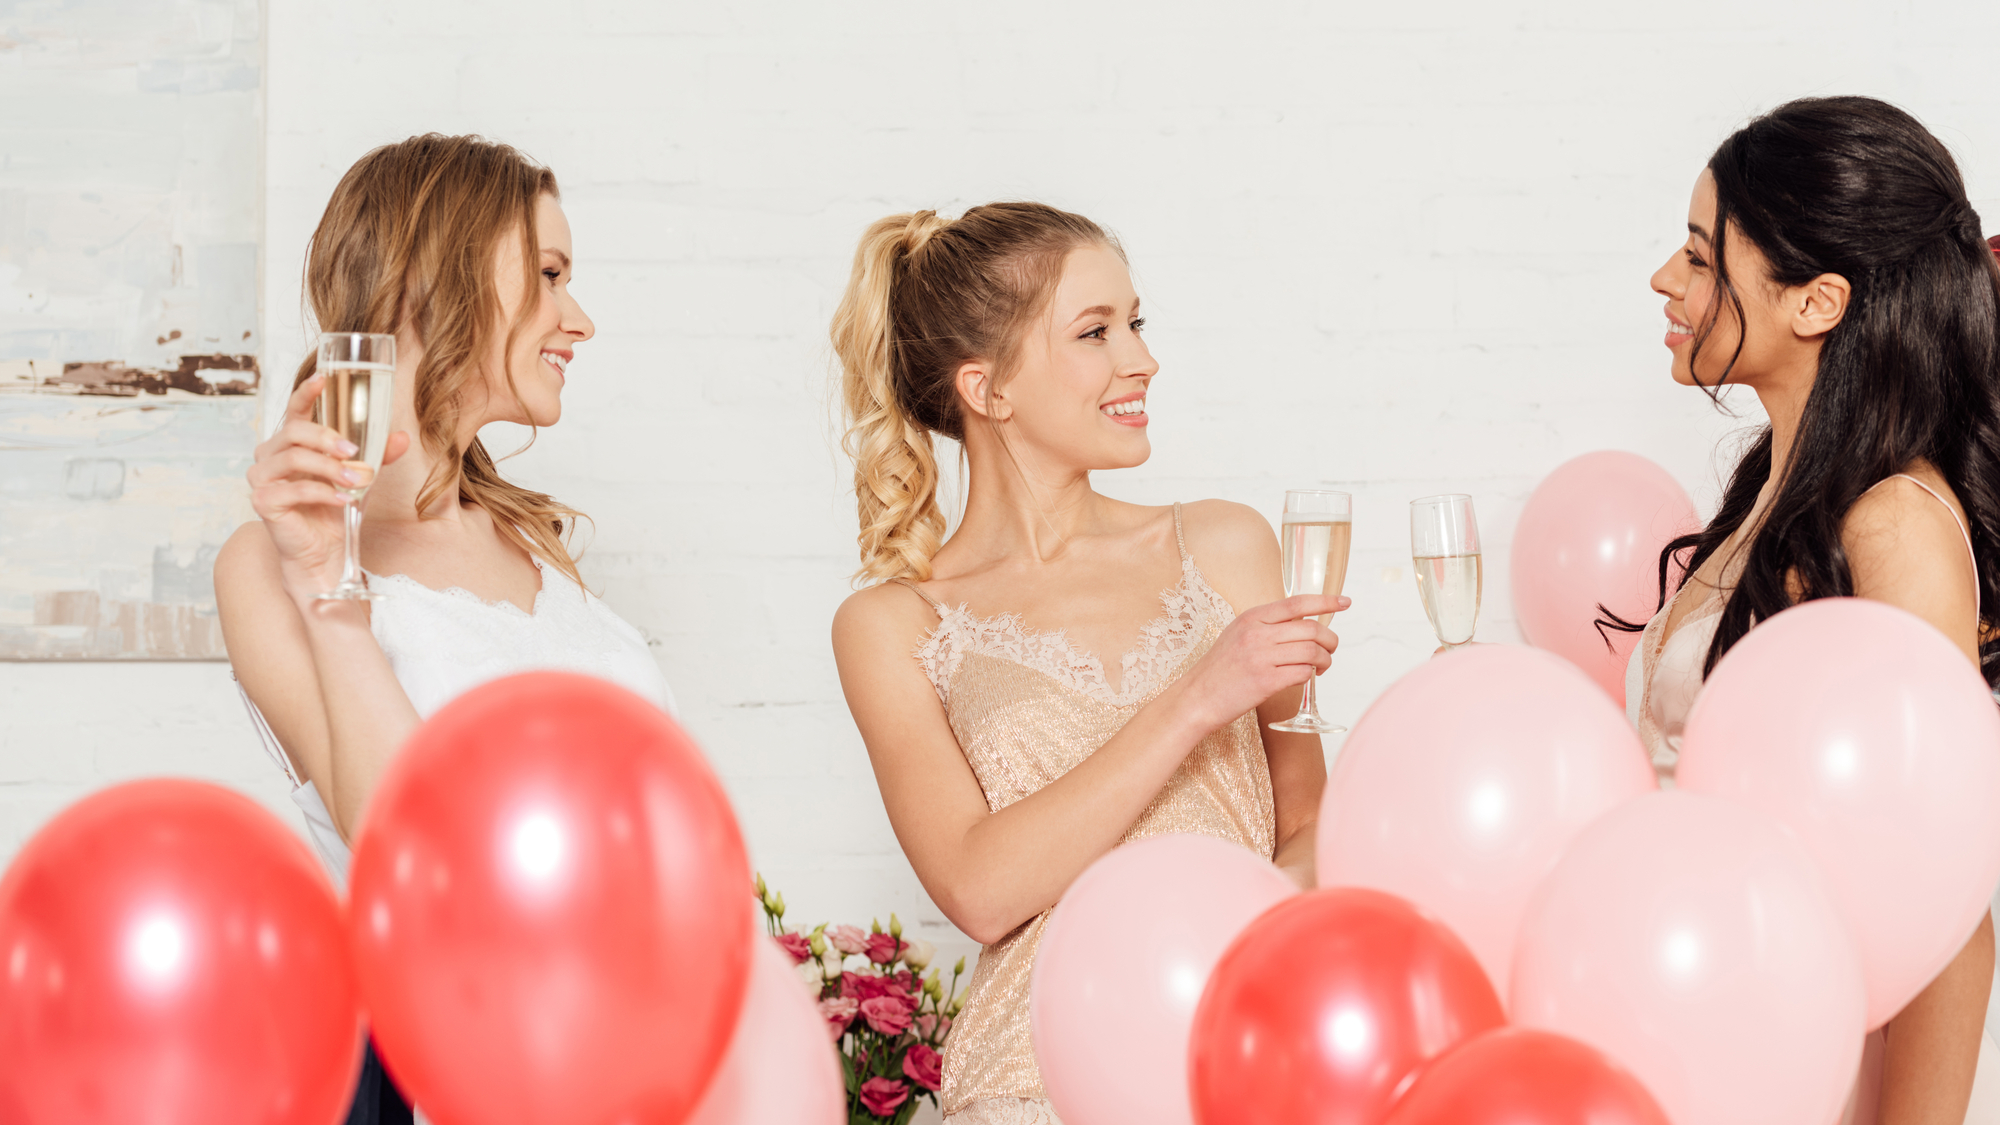 A group of women holding champagne glasses and balloons at a special event.